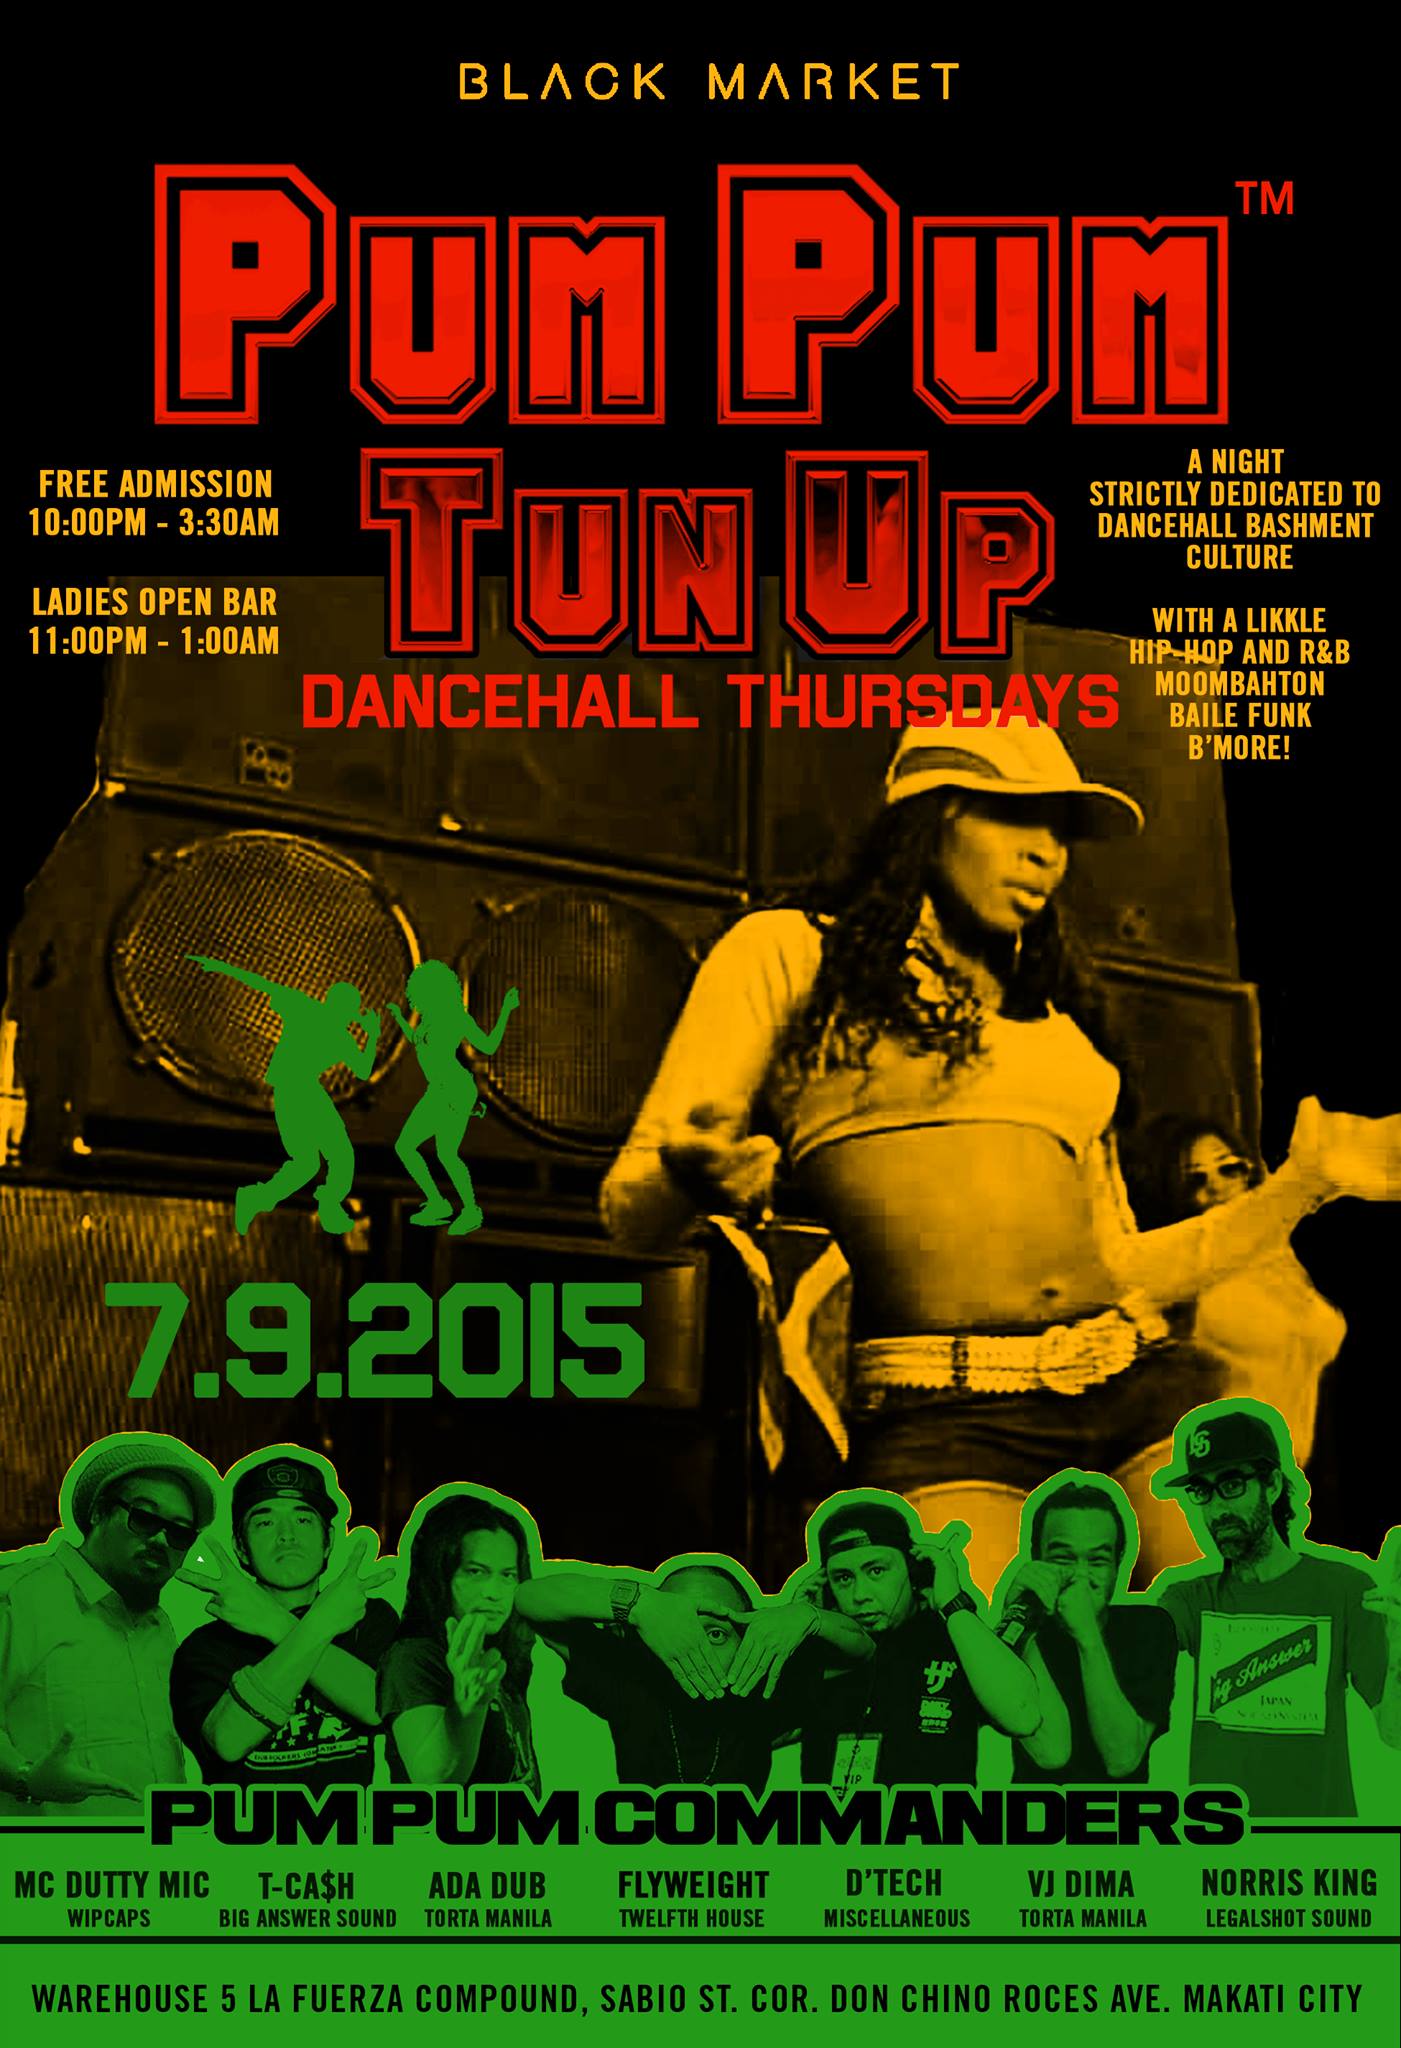 PUM PUM TUN UP!     Thursday     at 10:00pm     3 days from now · 85°F / 77°F Thunderstorm     	     Show Map     Black Market     WAREHOUSE 5, LA FUERZA COMPOUND 2, SABIO ST., Makati